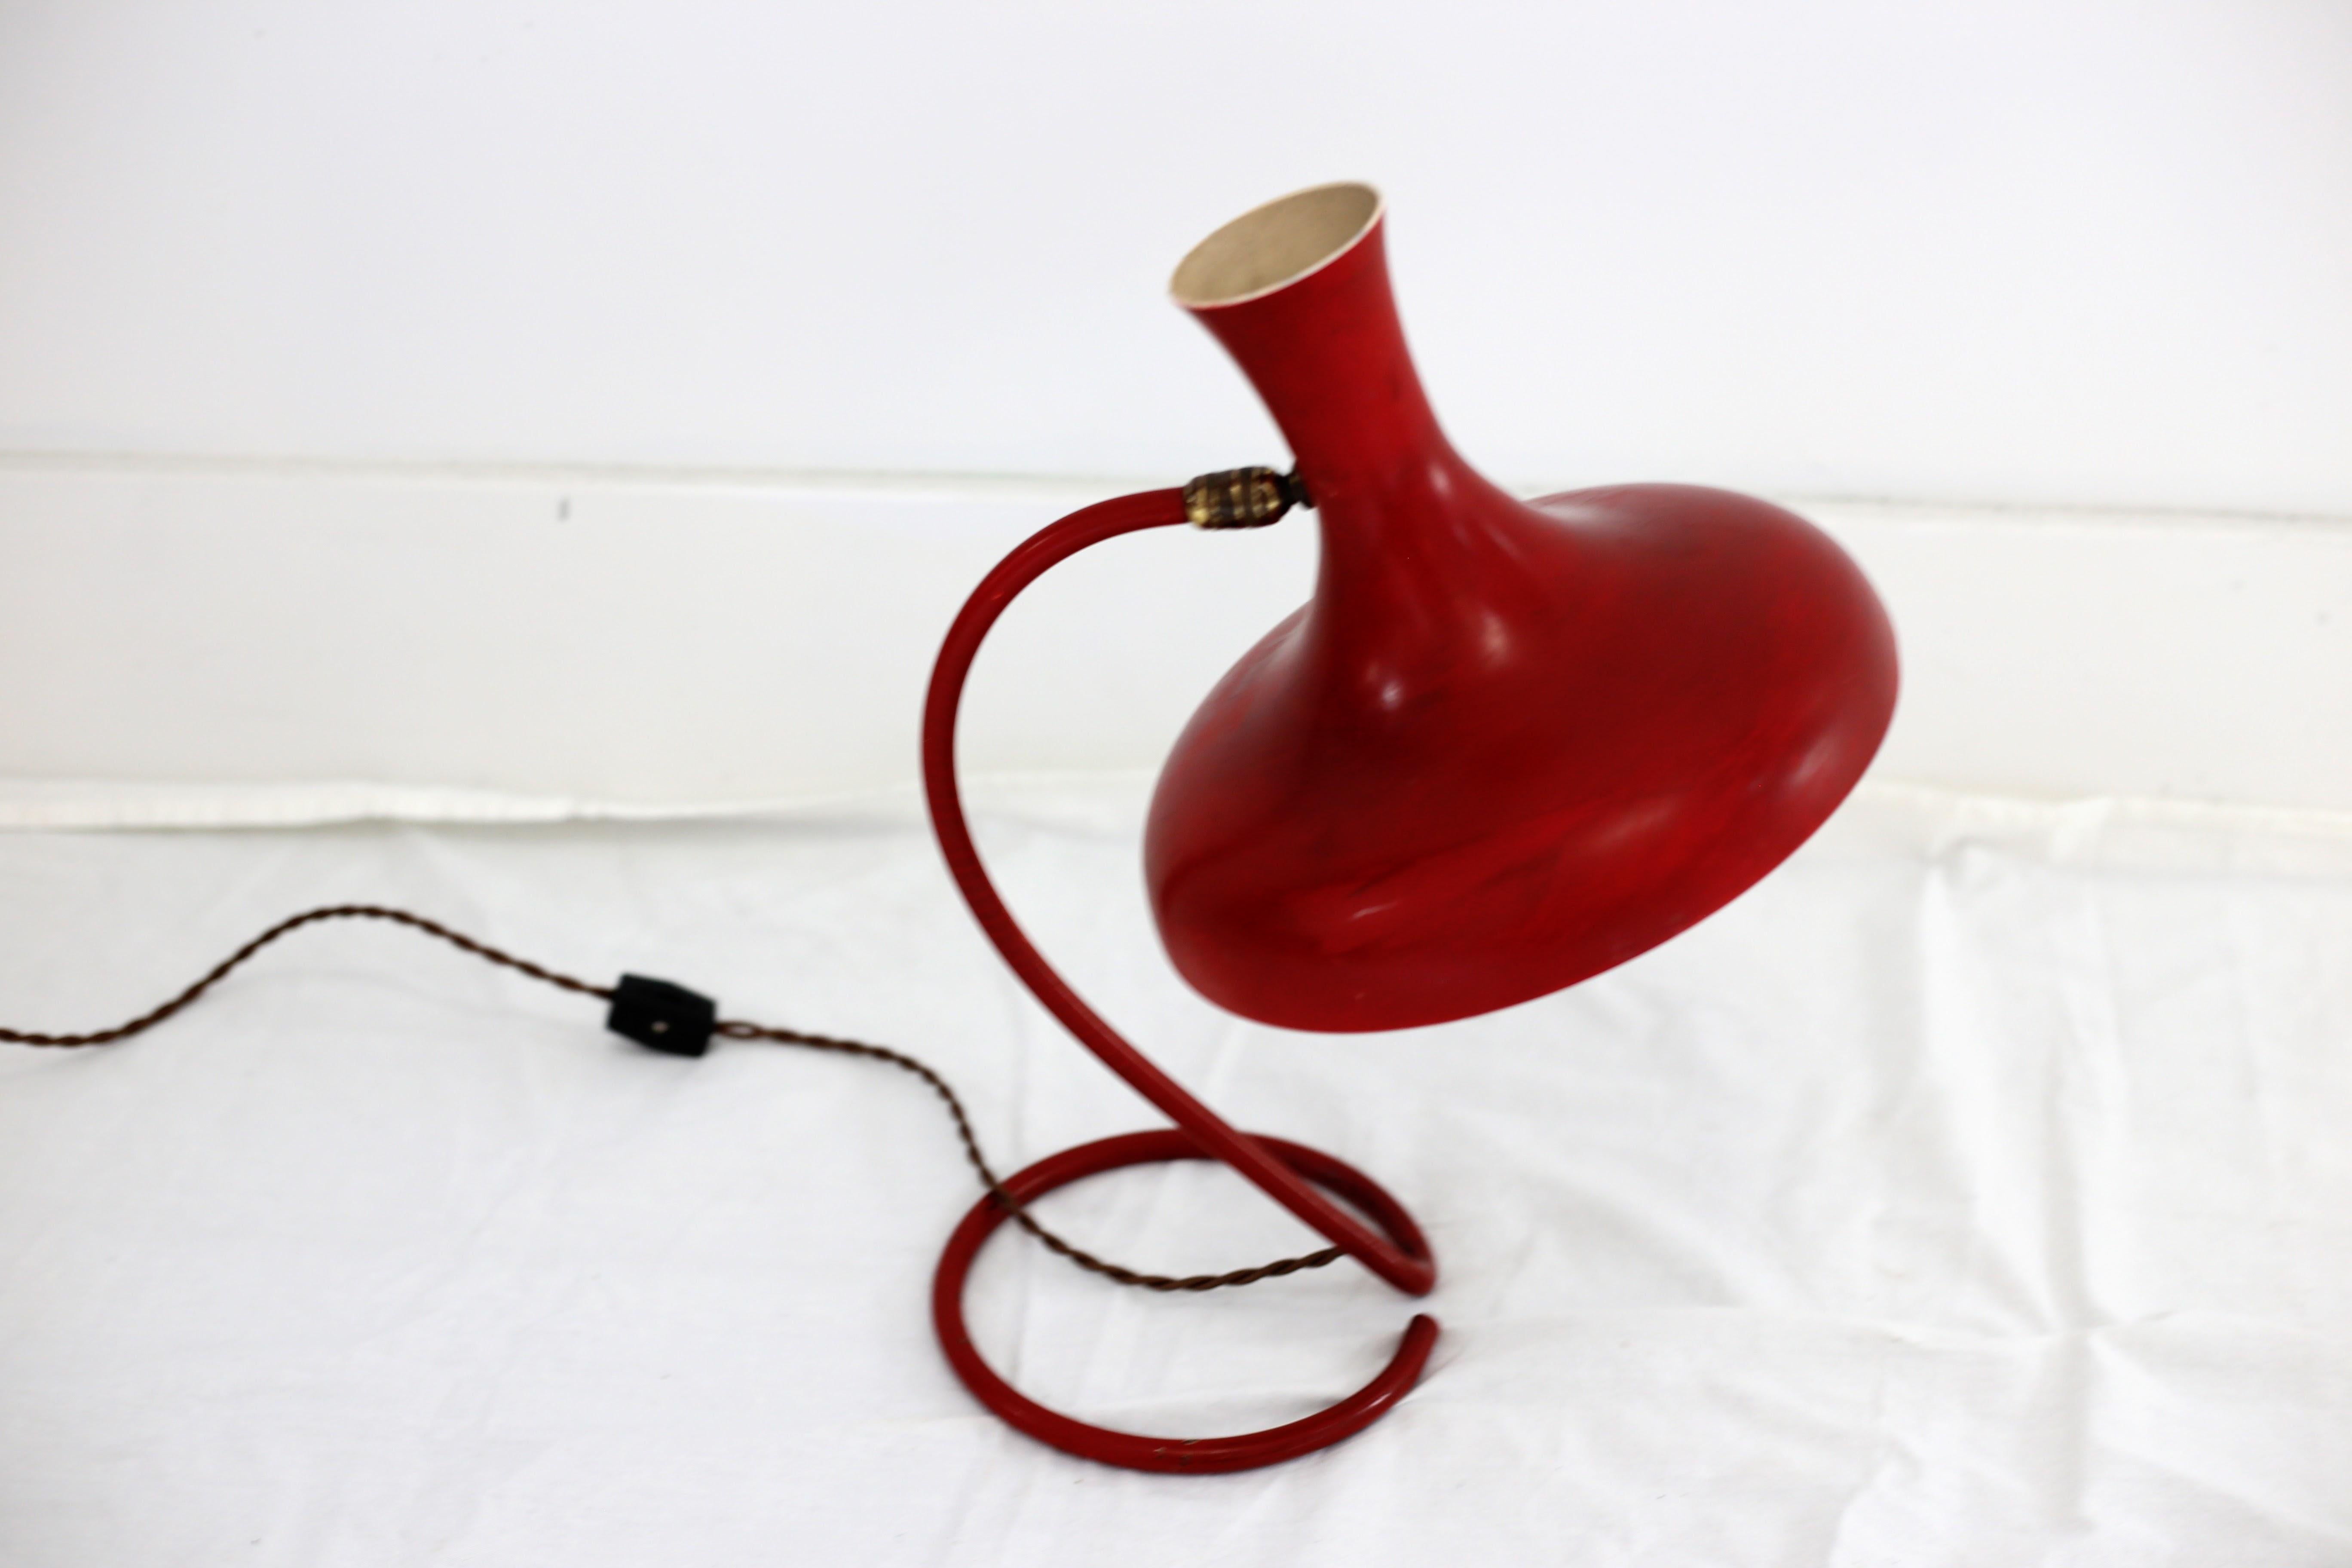 A good looking vintage midcentury red metal table or desk lamp with a gooseneck base and swivel mounted shade. The base measures 6